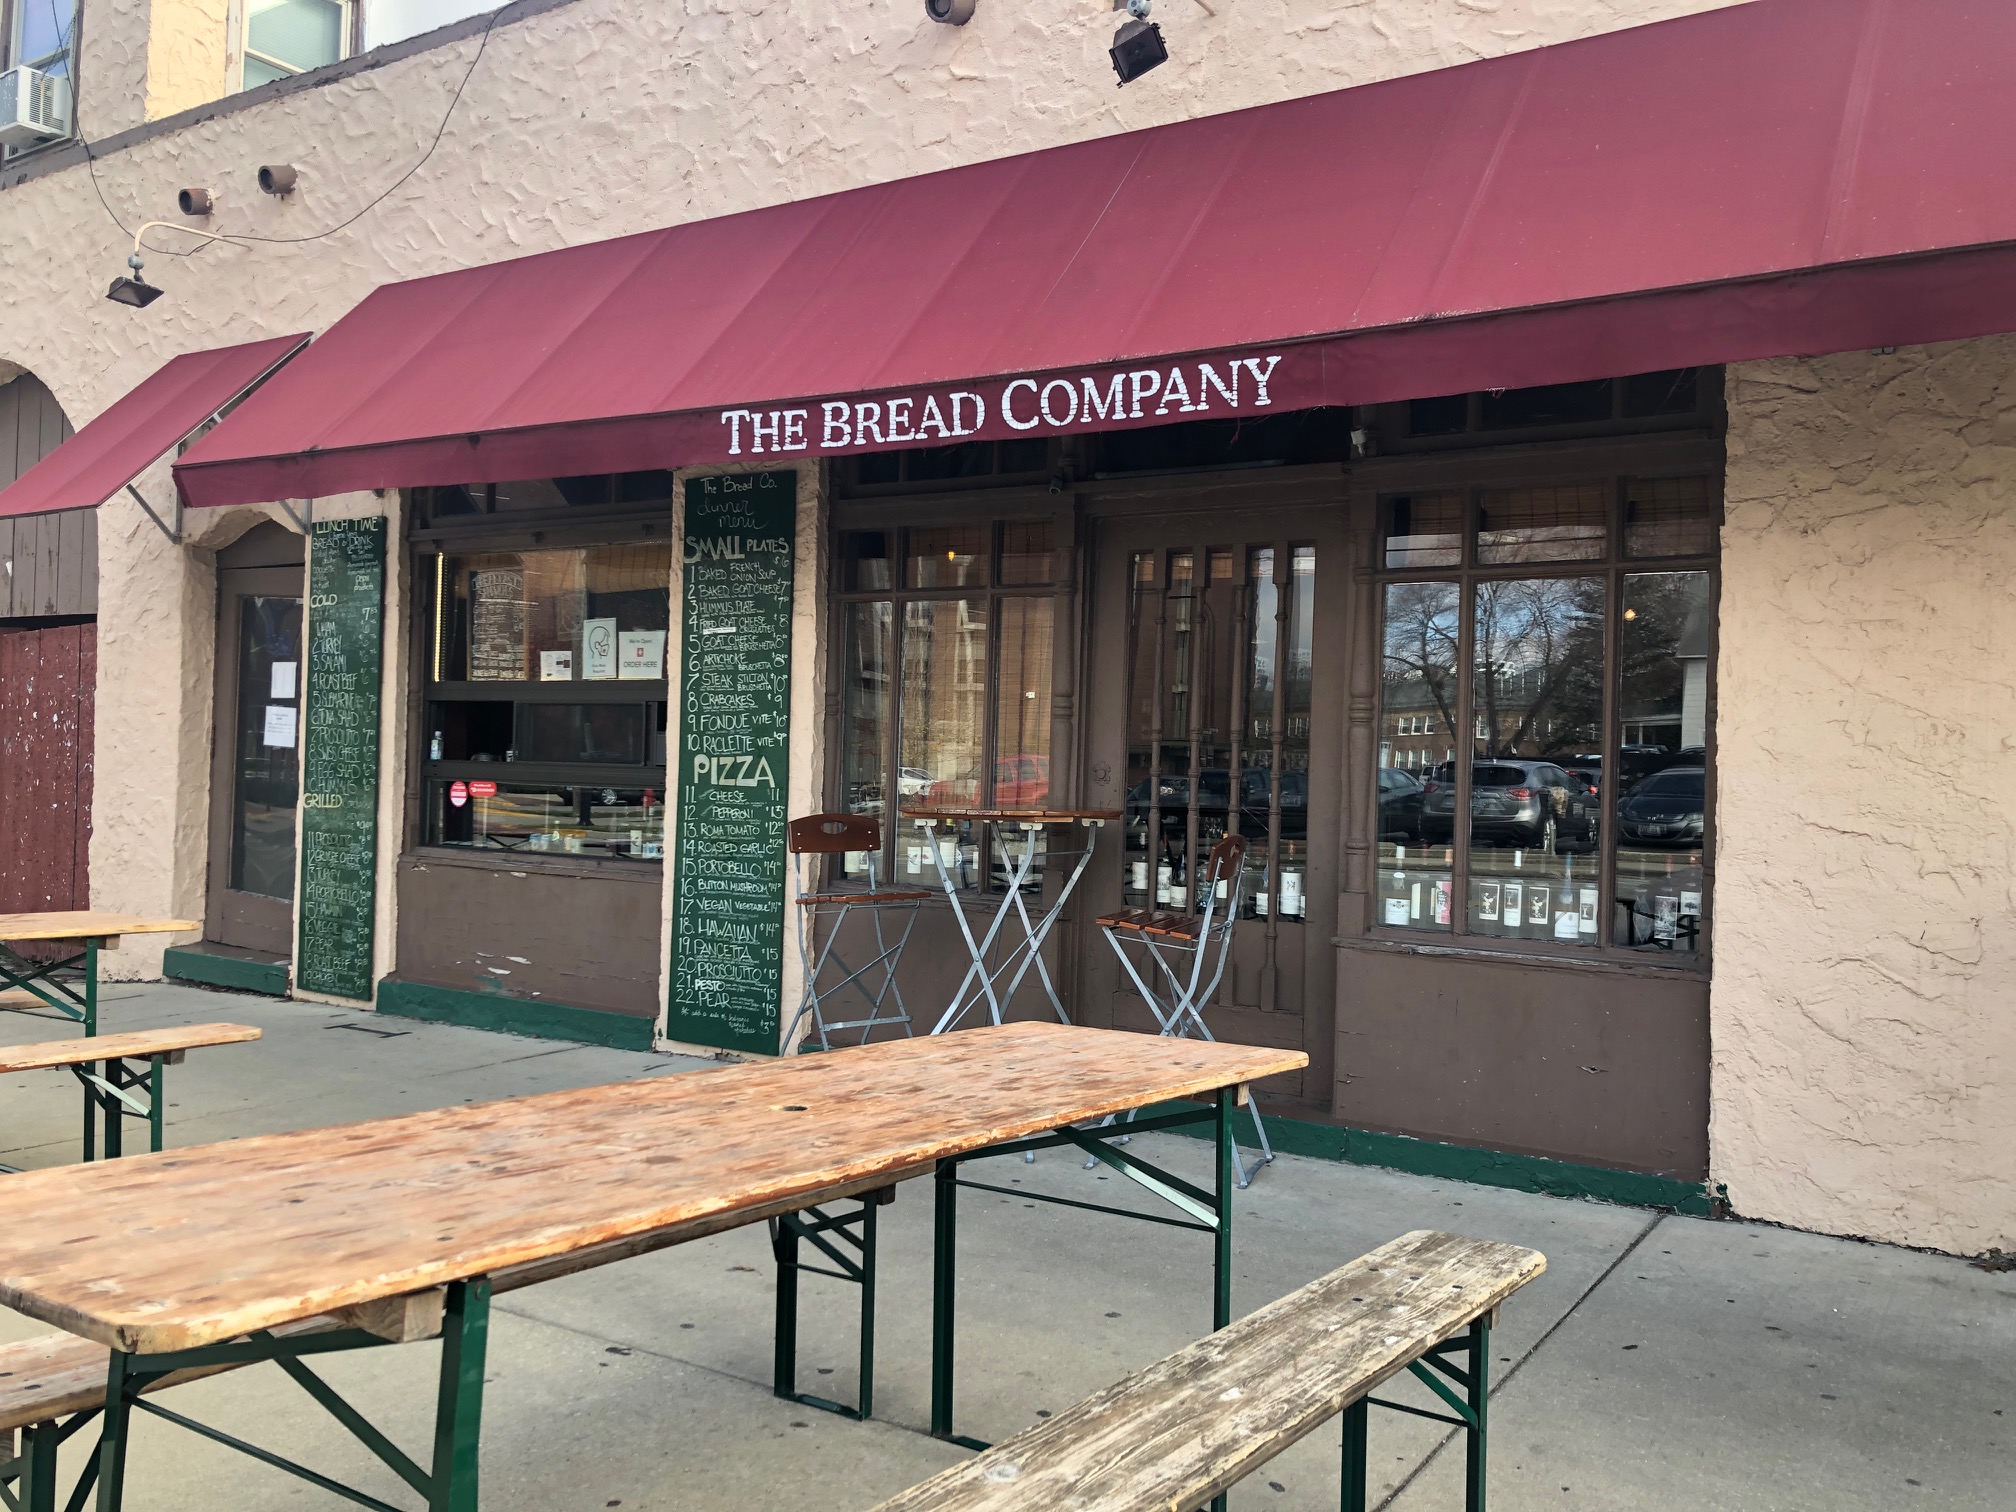 The exterior of The Bread Company has a burgundy awning with the restaurant's name on the light brown stucco outside with long wooden tables out front. Photo by Alyssa Buckley.